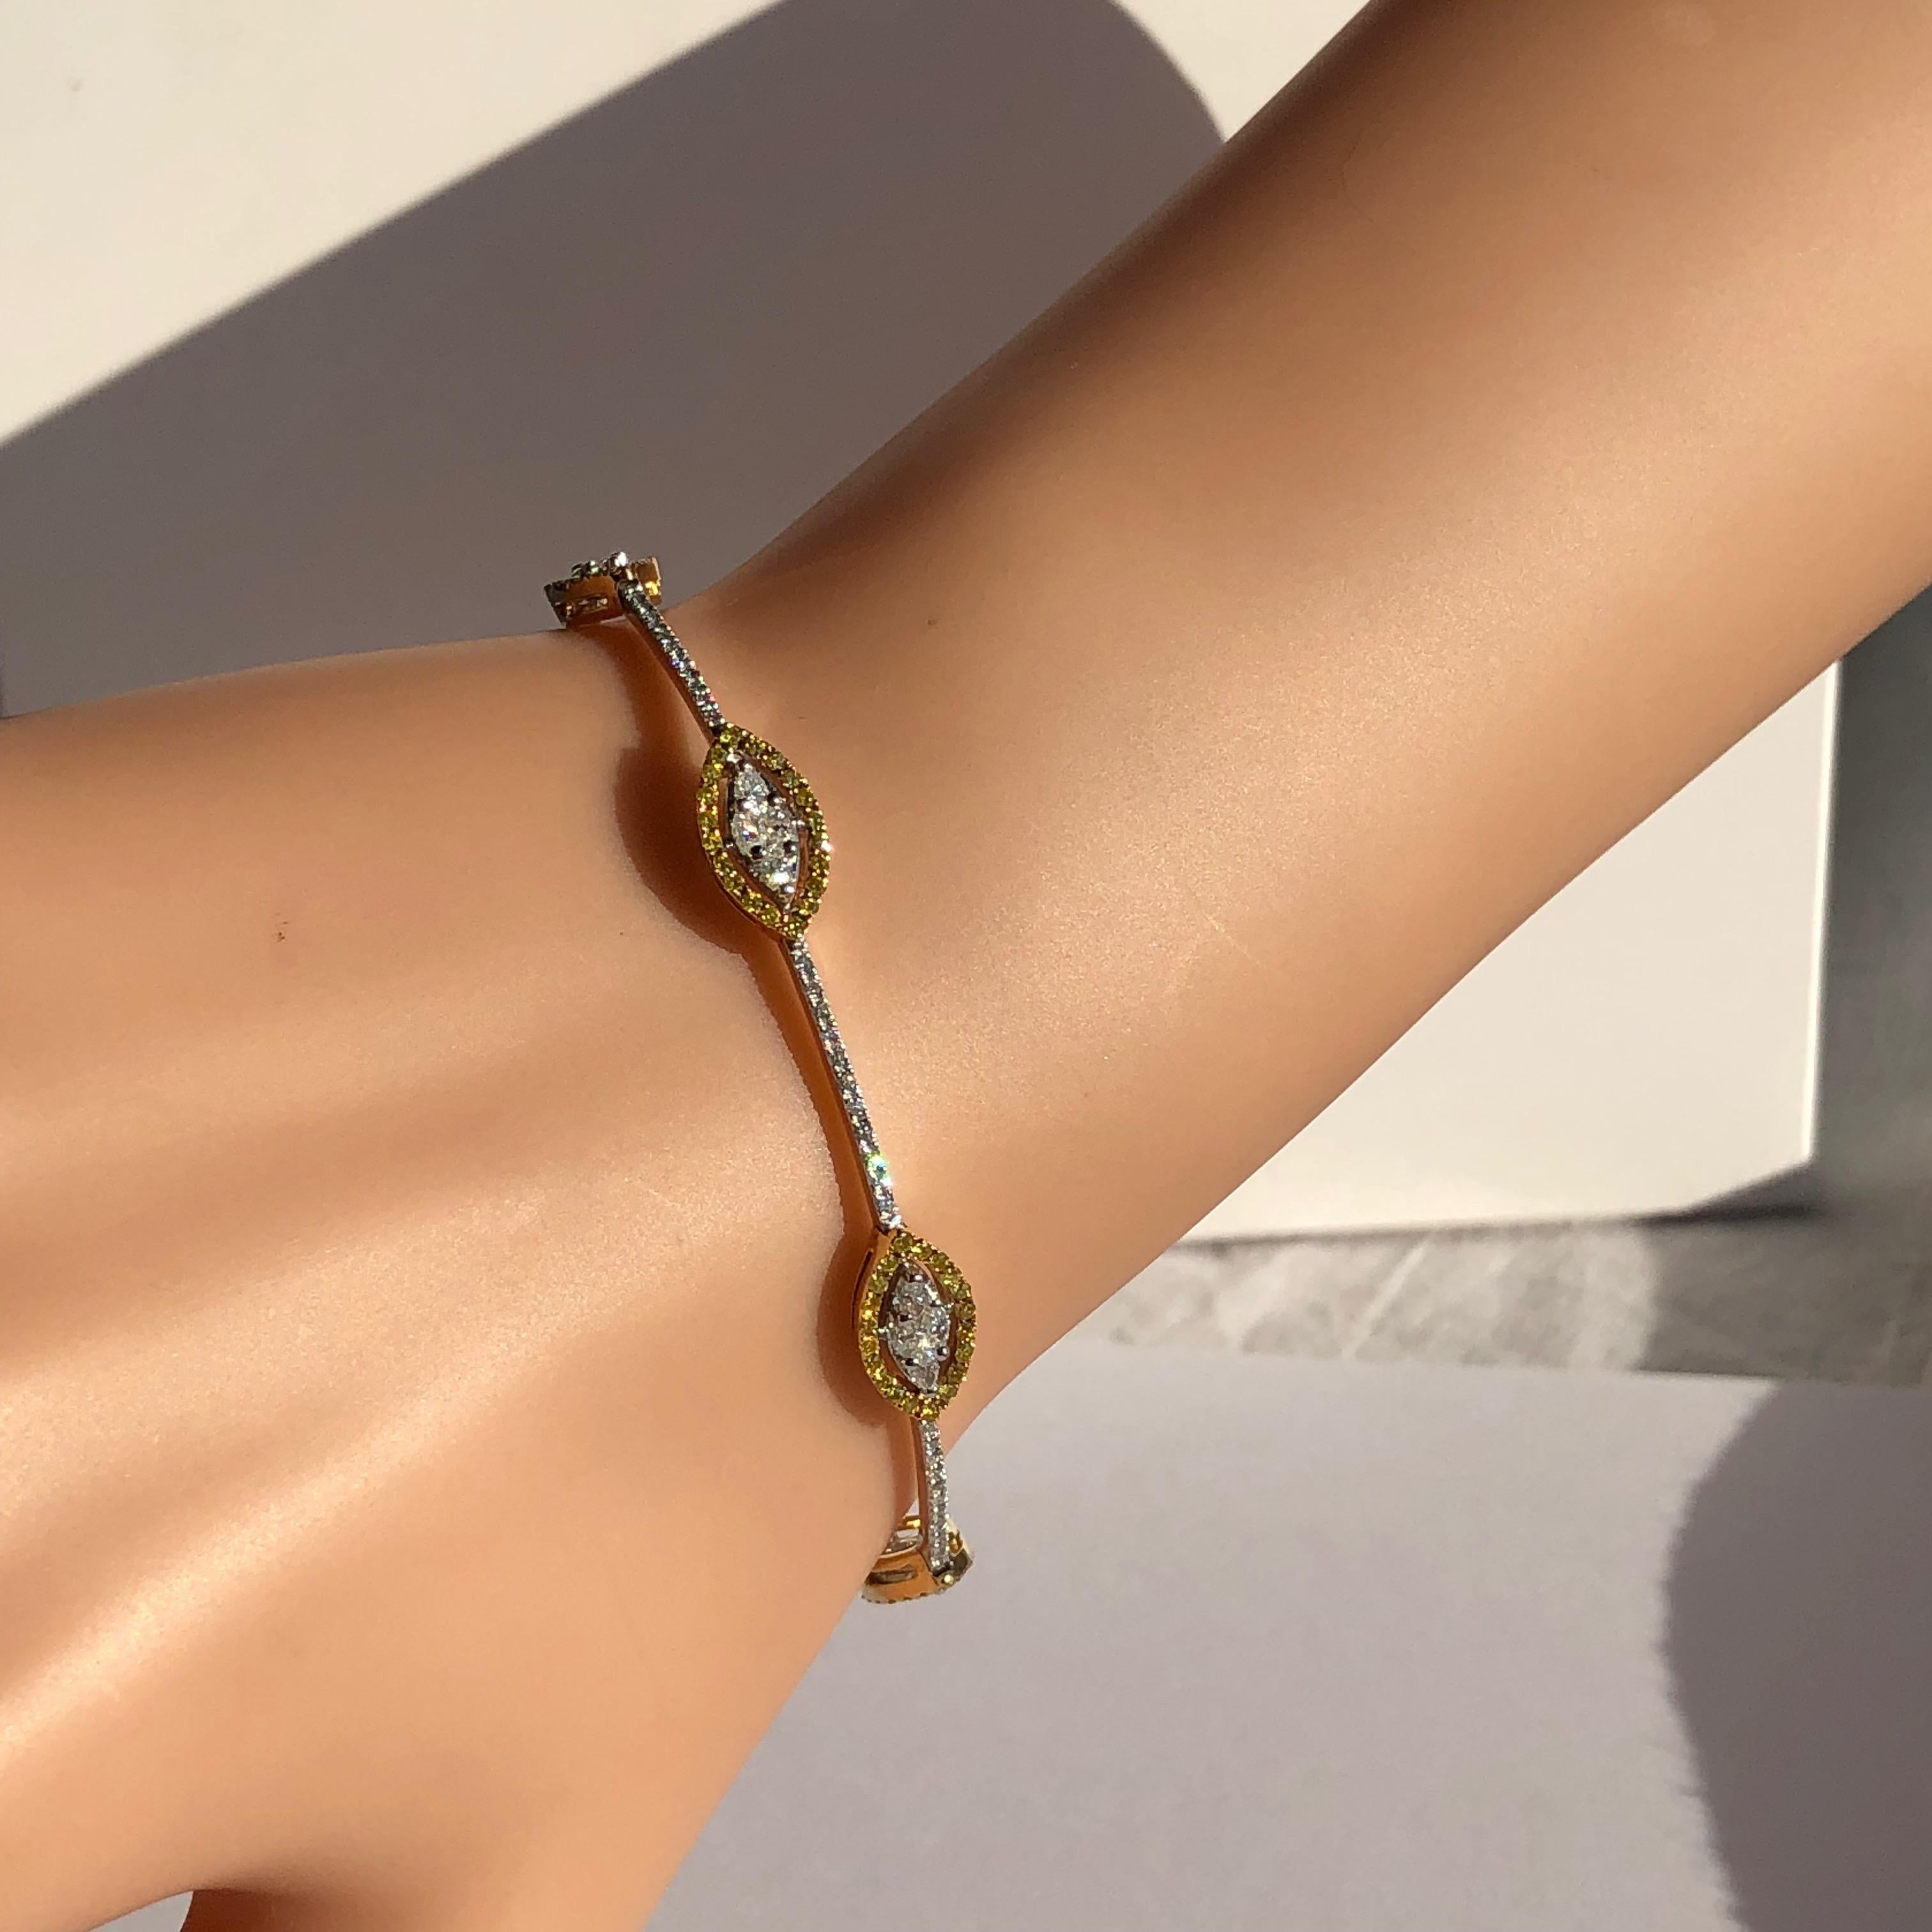 David Morris White Diamond and Yellow Diamond Bracelet

Designed as a diamond bracelet with six navette shaped sections set with marquise diamonds each within a yellow diamond frame

Metal: Platinum and 18K yellow gold 

Diamonds: 24 marquise and